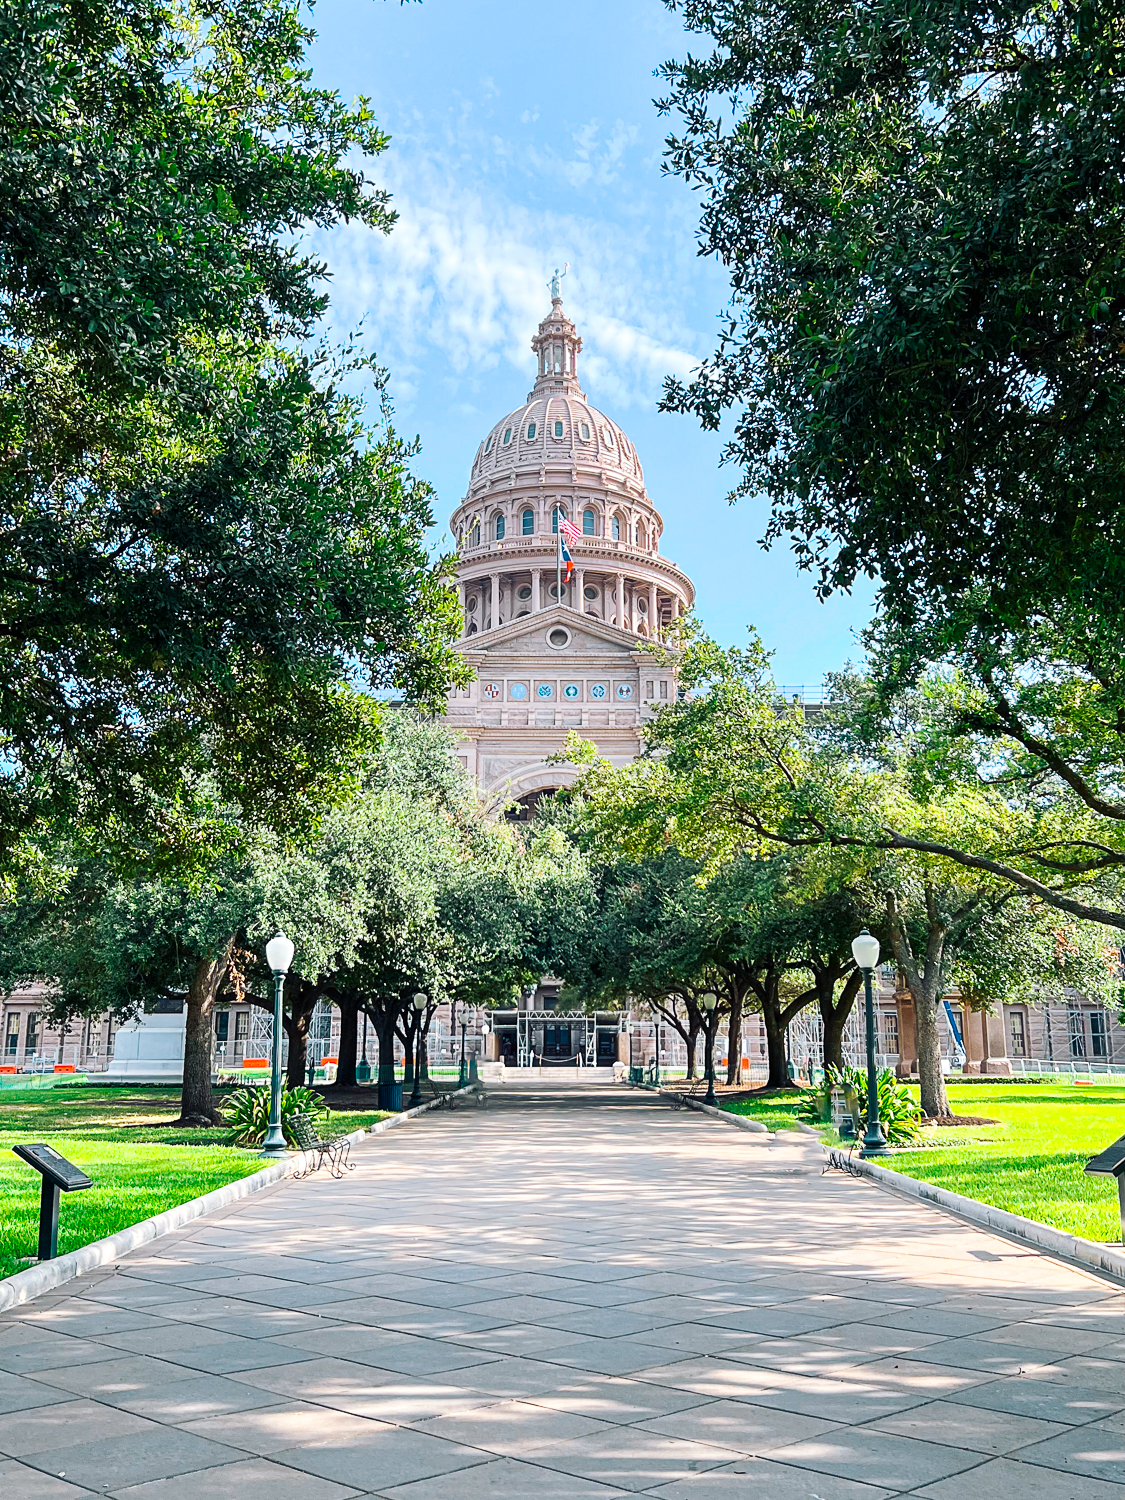 Pacific Globetrotters, budget family travel blog, shares Top Places To Visit In Austin.